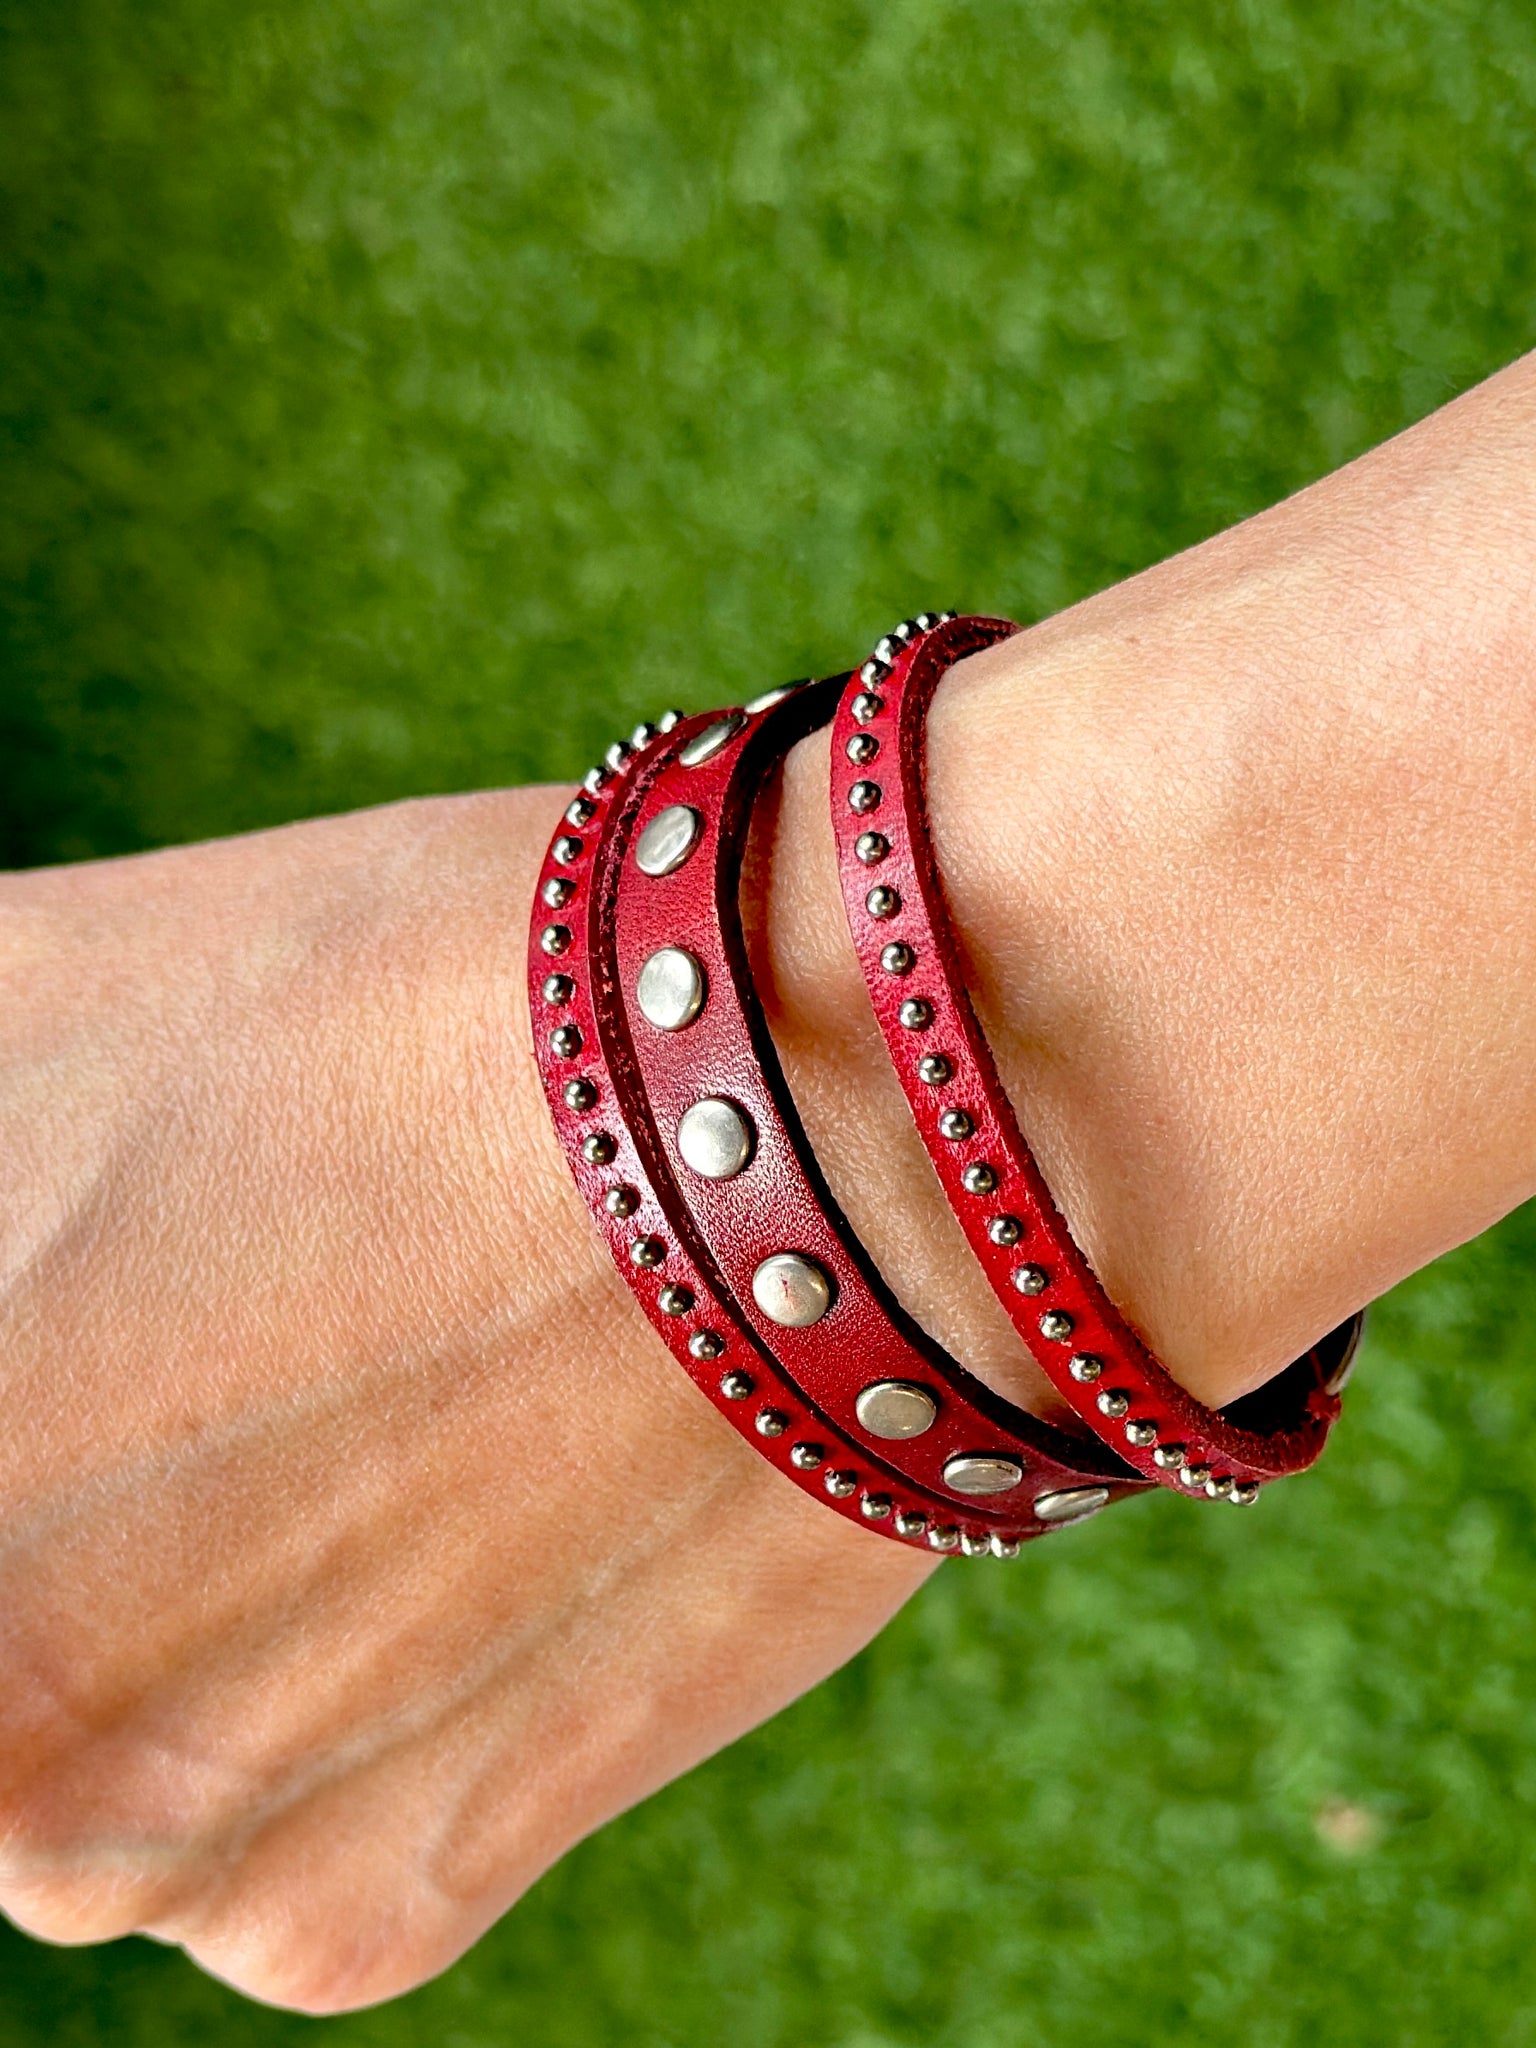 Handmade Genuine Triple Strands Leather Bracelet With Metal Studs Accents